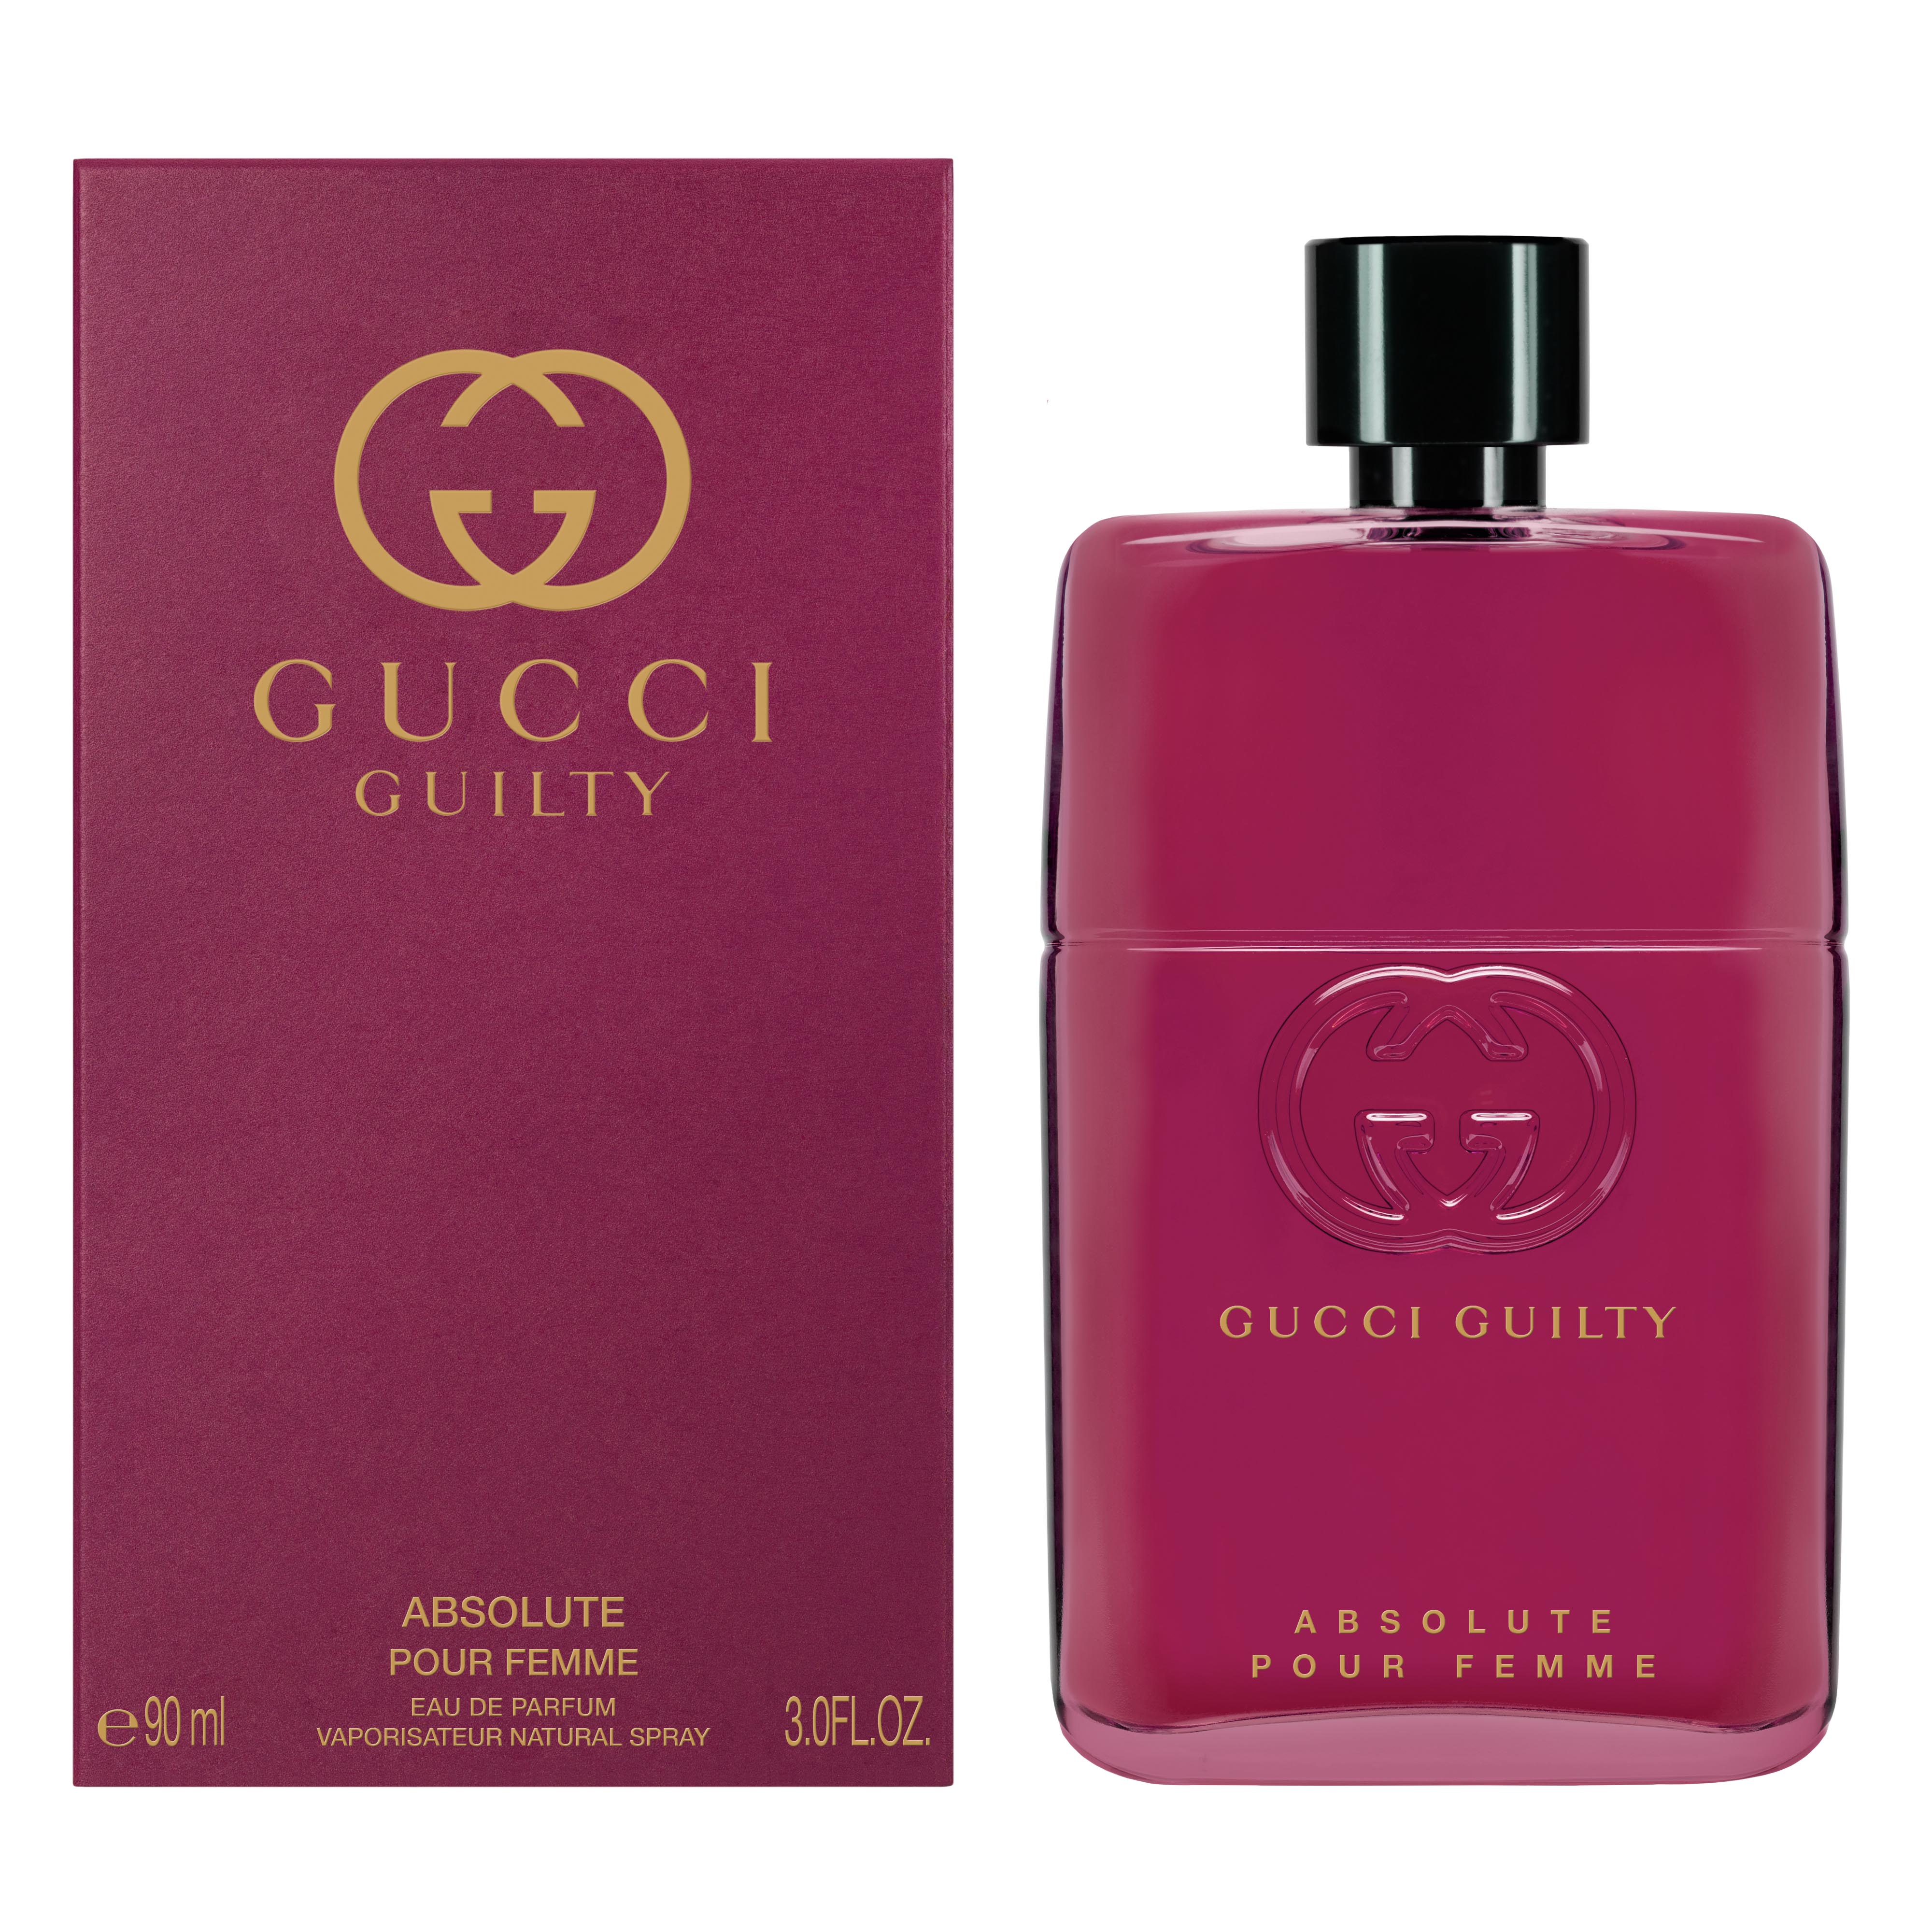 Gucci guilty absolute pour. Gucci guilty absolute pour femme EDP 50ml. Gucci guilty absolute pour femme. Gucci guilty absolute pour homme 50ml. Gucci Gucci guilty absolute pour femme.